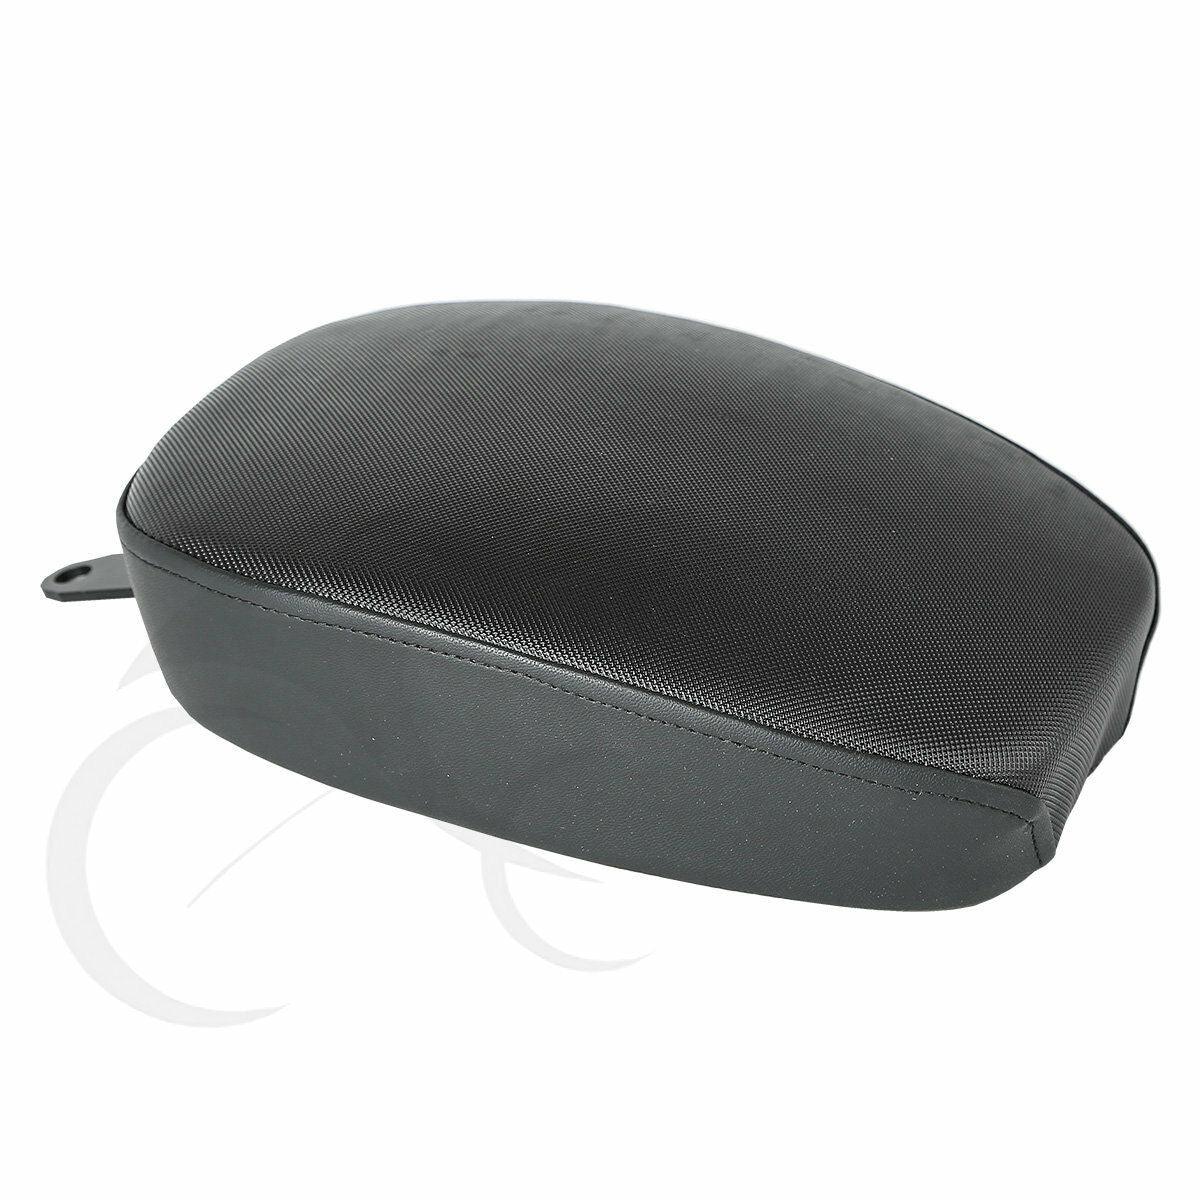 Rear Passenger Pillion Pad Seat For Harley Sportster Forty Eight XL 1200X 10-15 - Moto Life Products